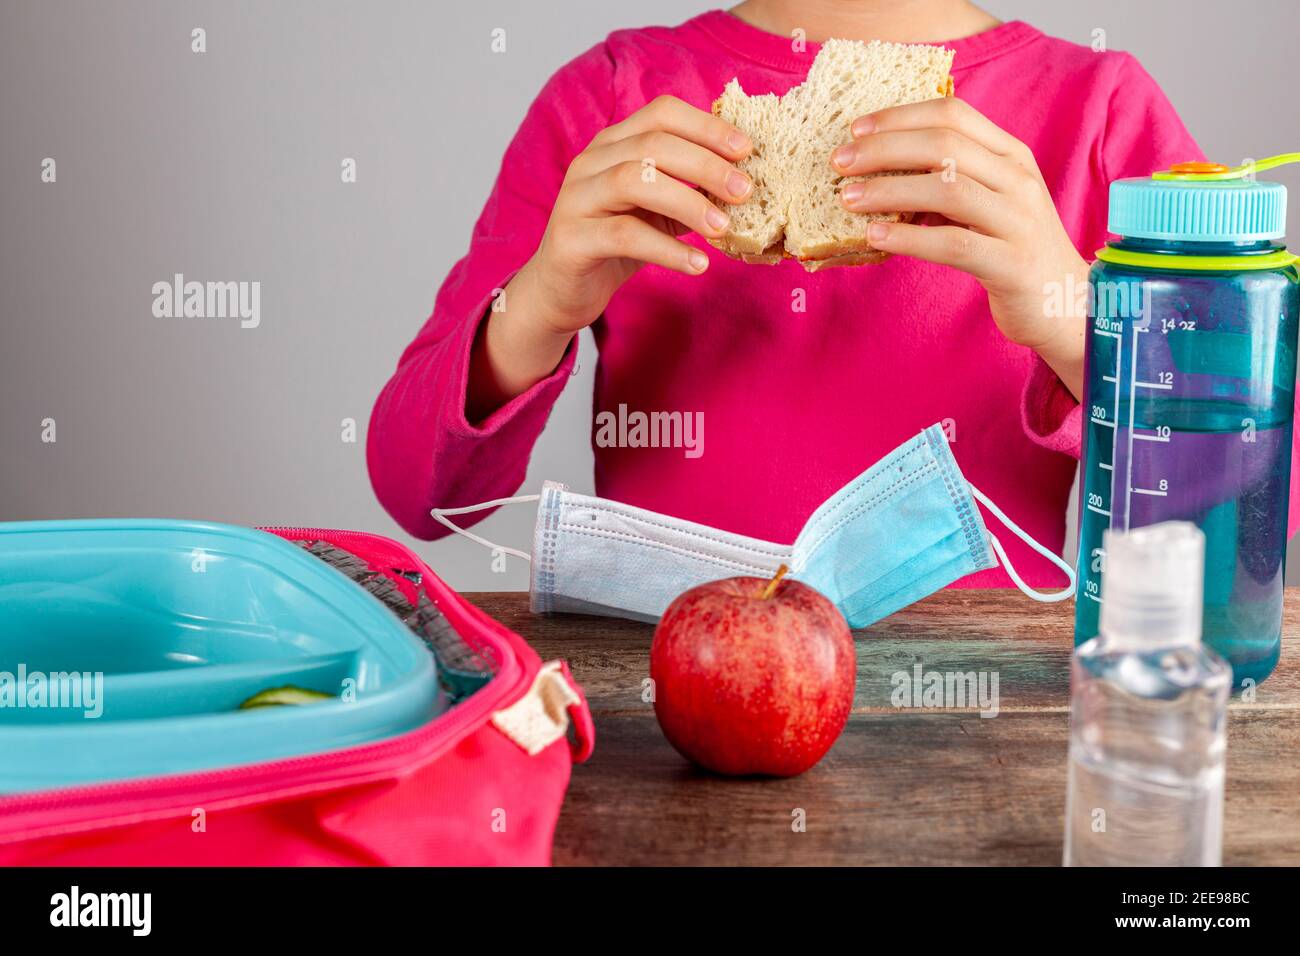 Closeup image with eating lunch at school concept during the phased reopening after COVID-19 pandemic closures. Girl with face mask removed eats sandw Stock Photo